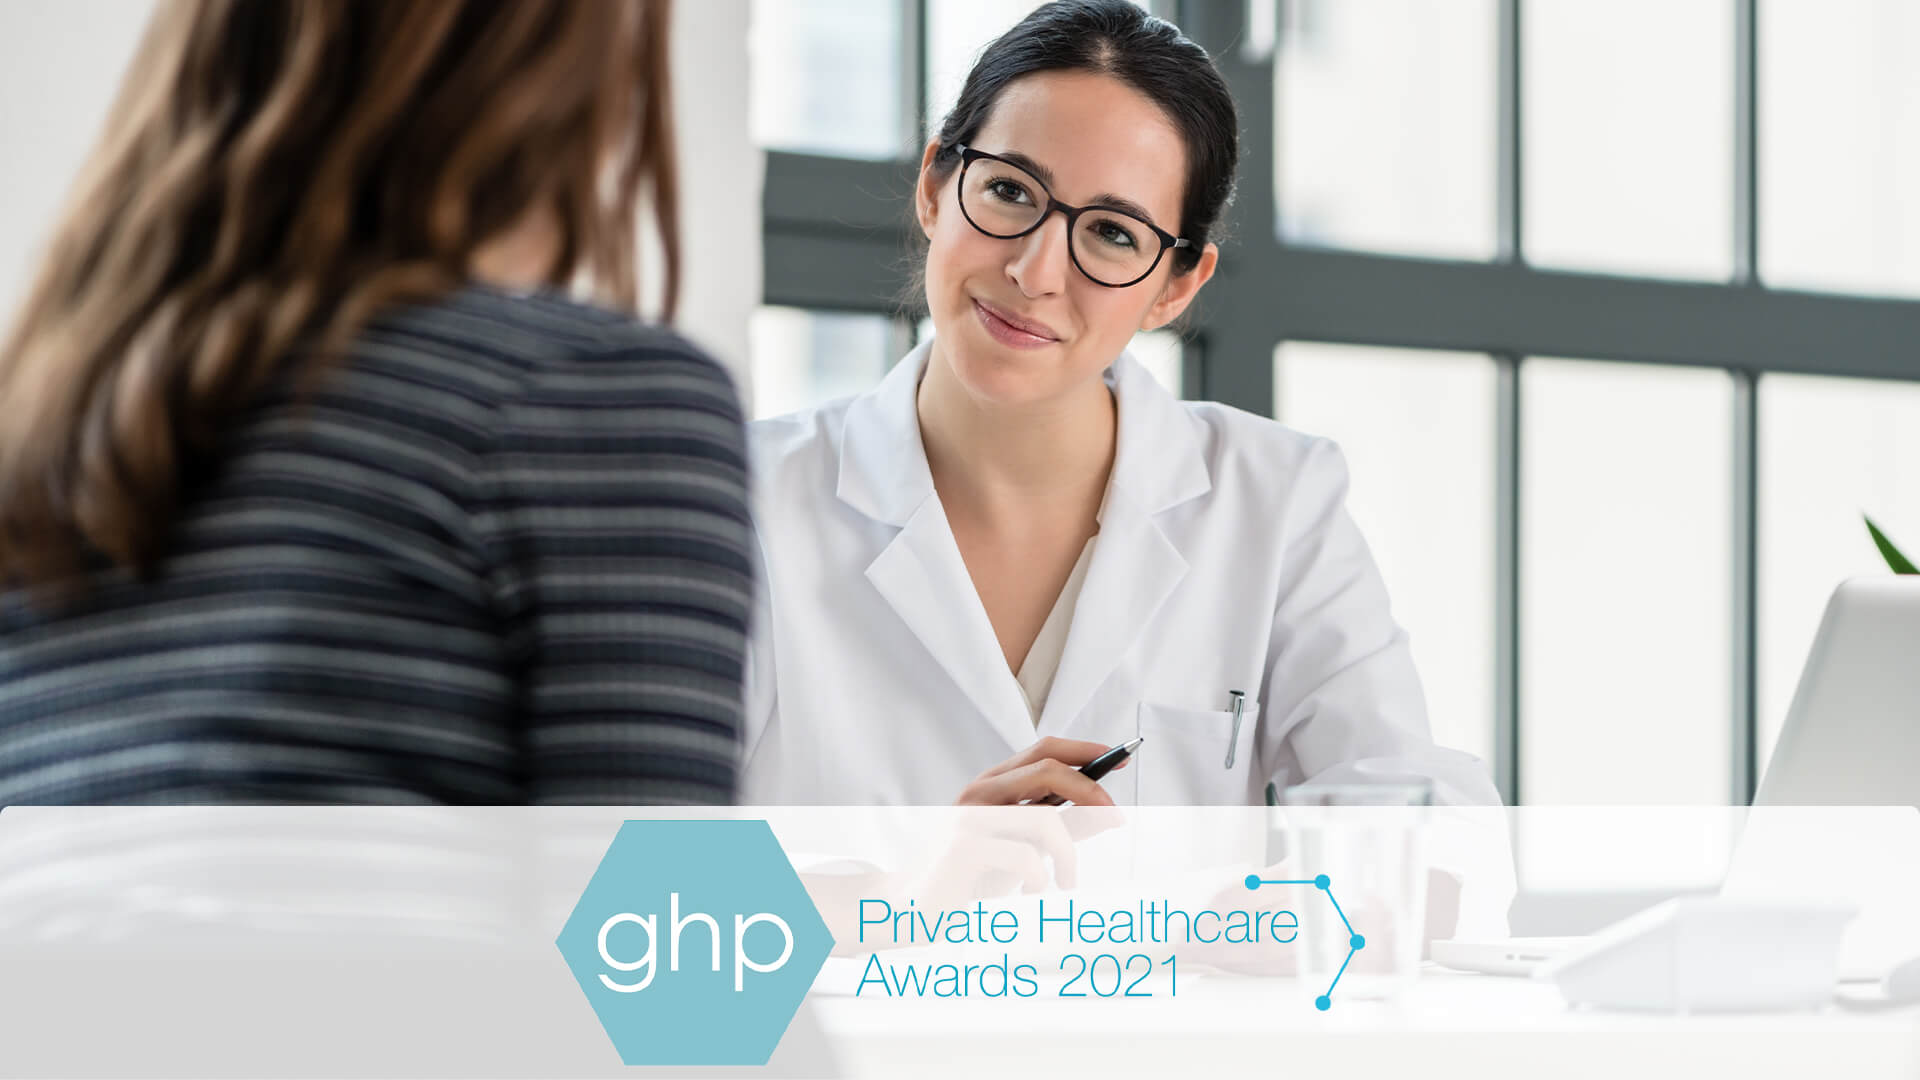 GHP Announces the Winners of the 2021 Private Healthcare Awards